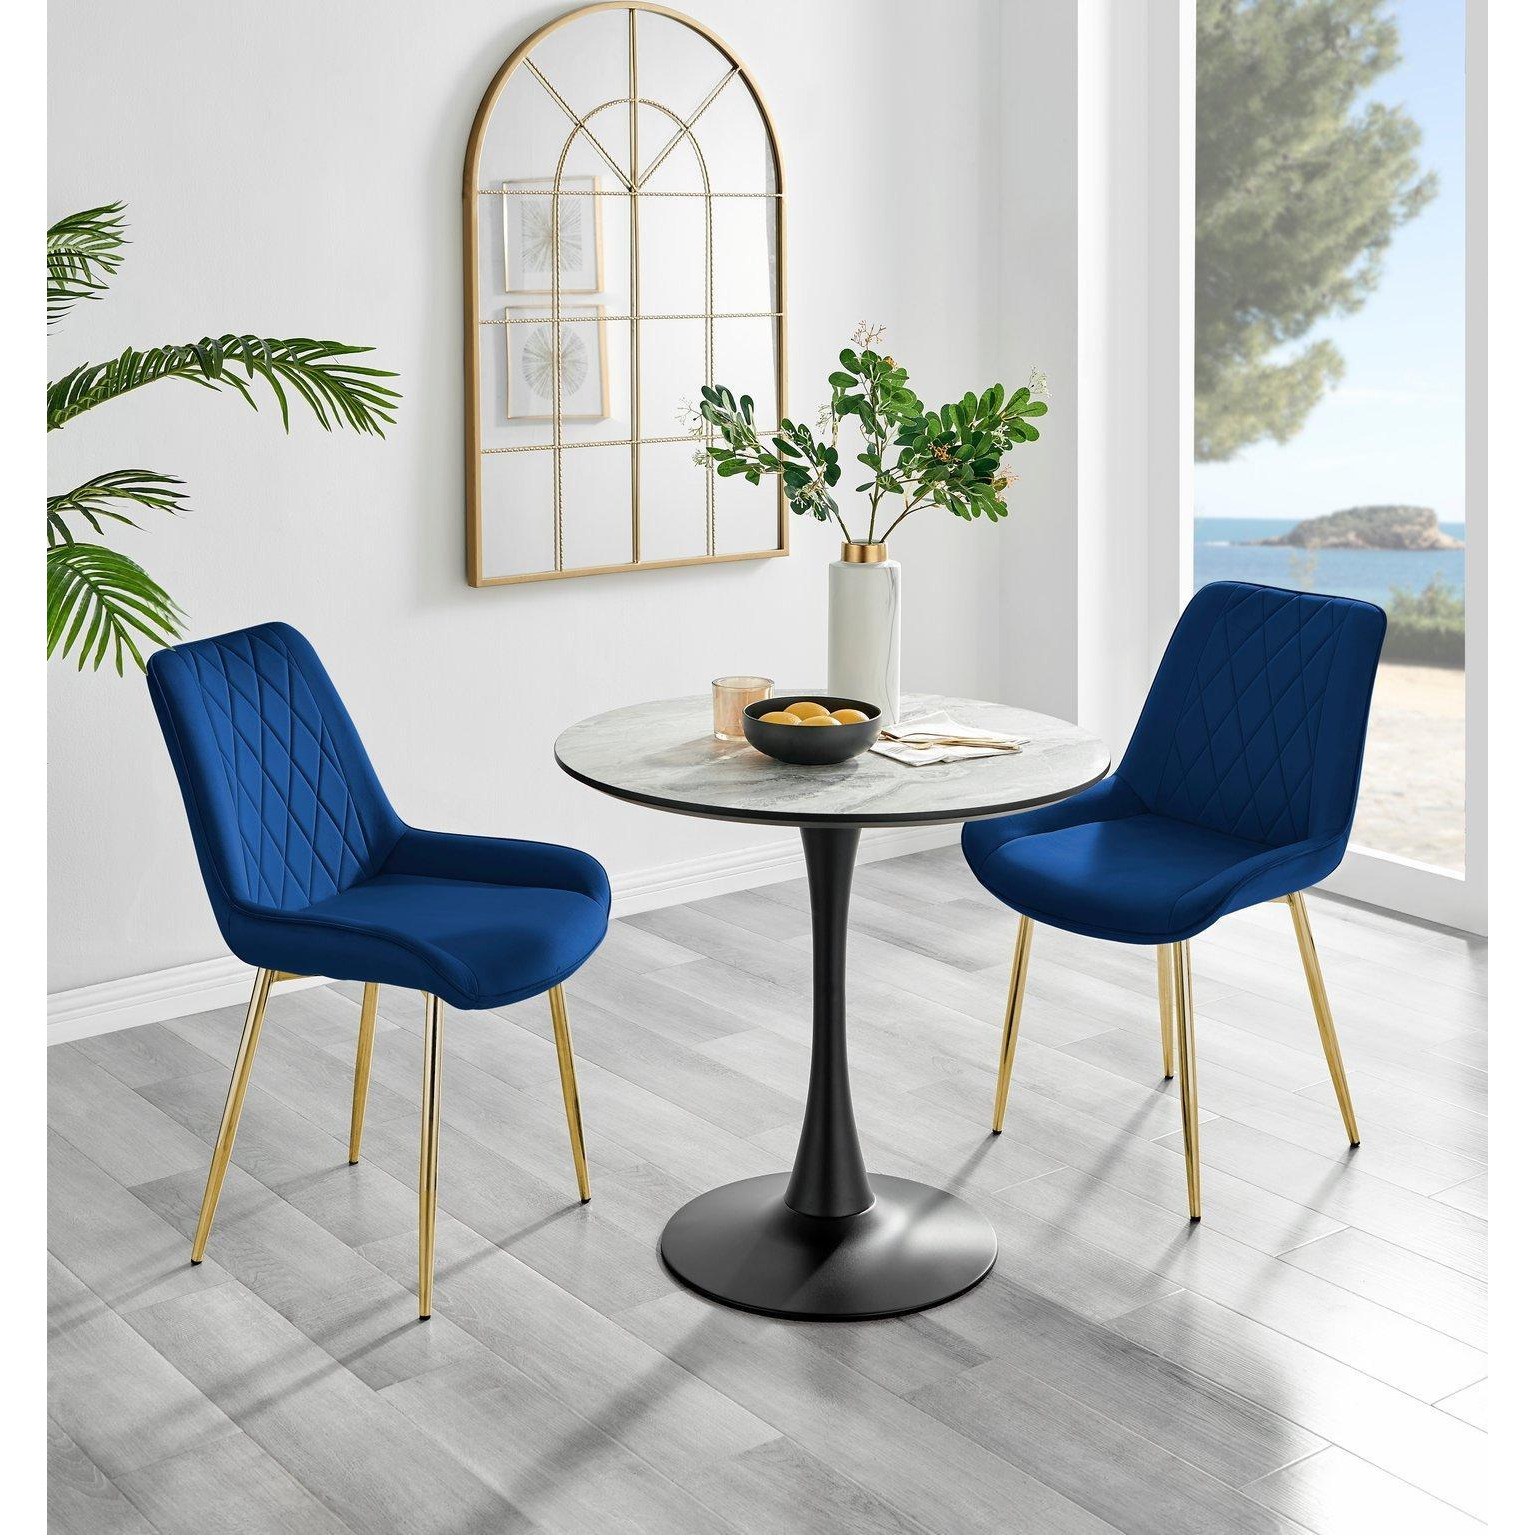 Elina White Marble Effect Scratch Resistant Dining Table & 2 Pesaro Gold Leg Velvet Chairs - image 1